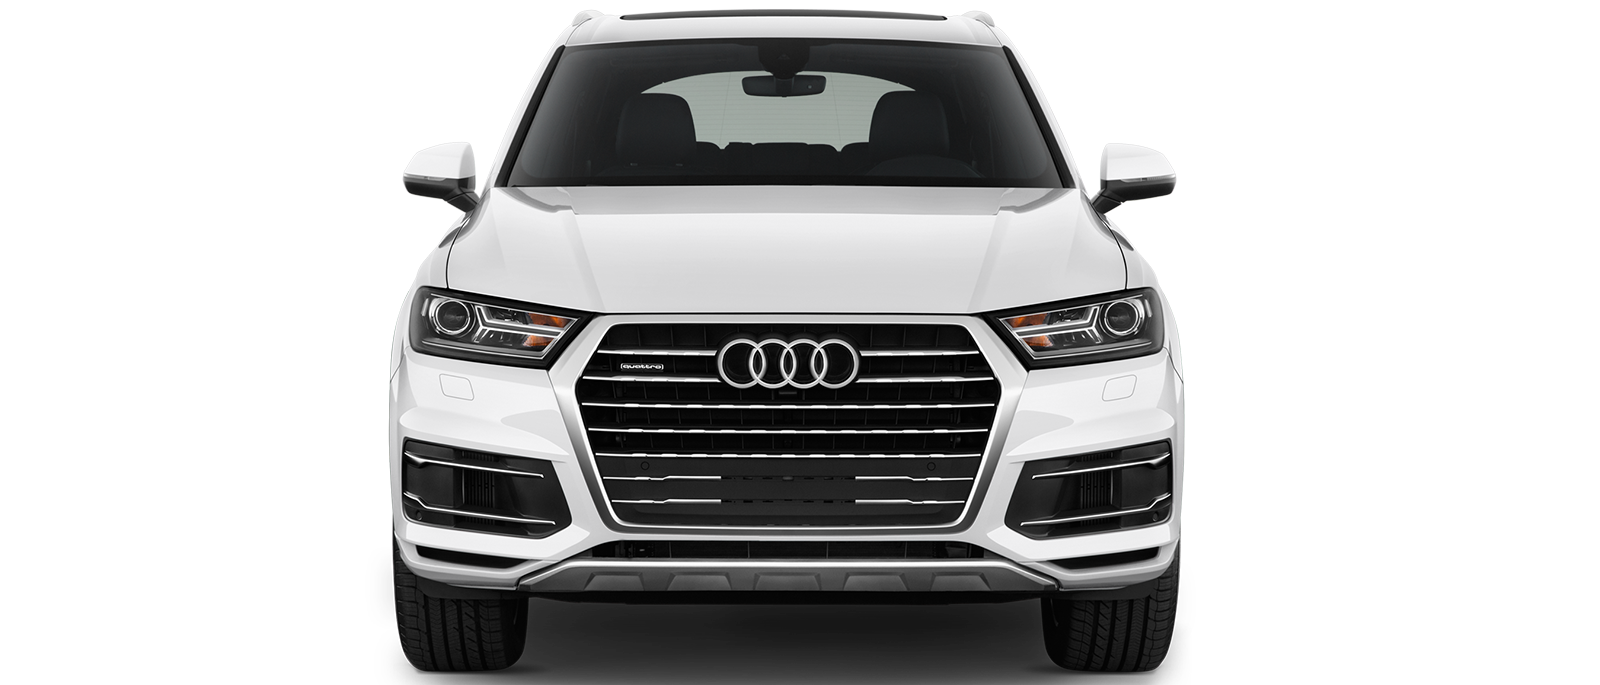 Front Suv View Photos Audi PNG Image